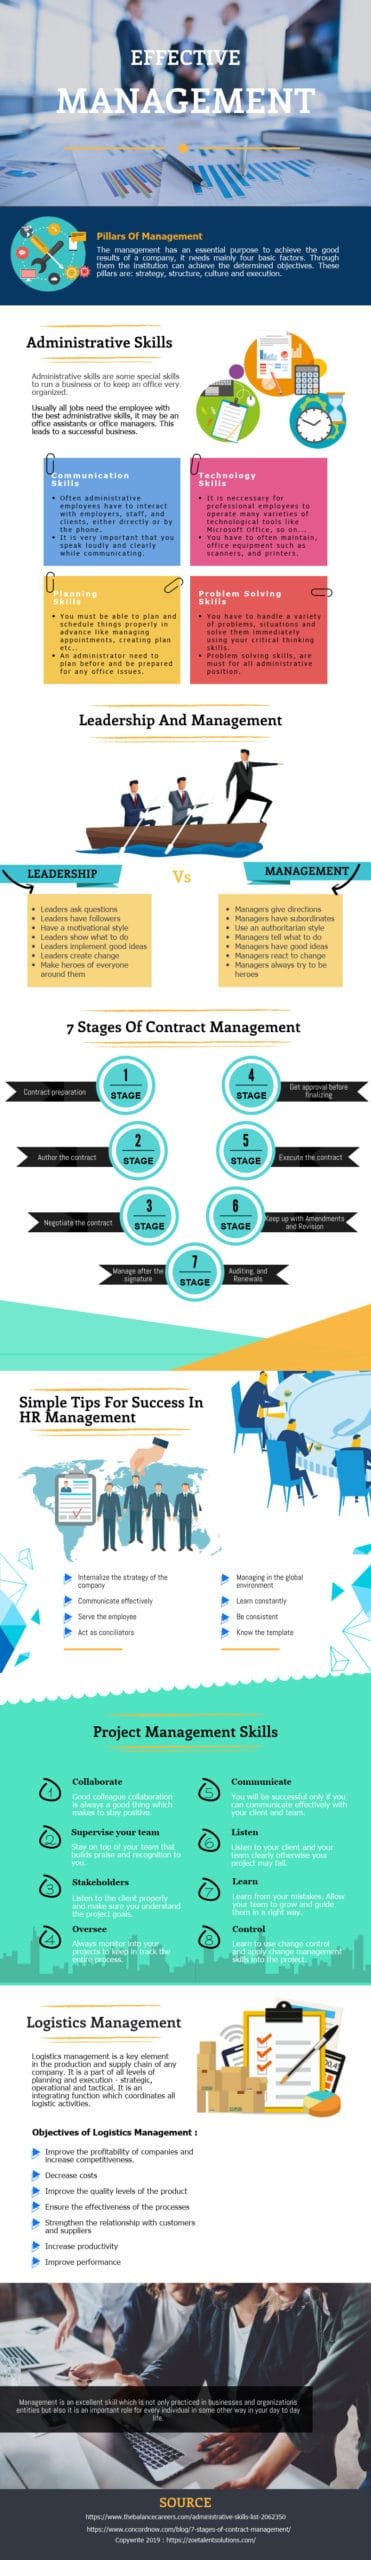 8 frequent mistakes of Human Resources Management